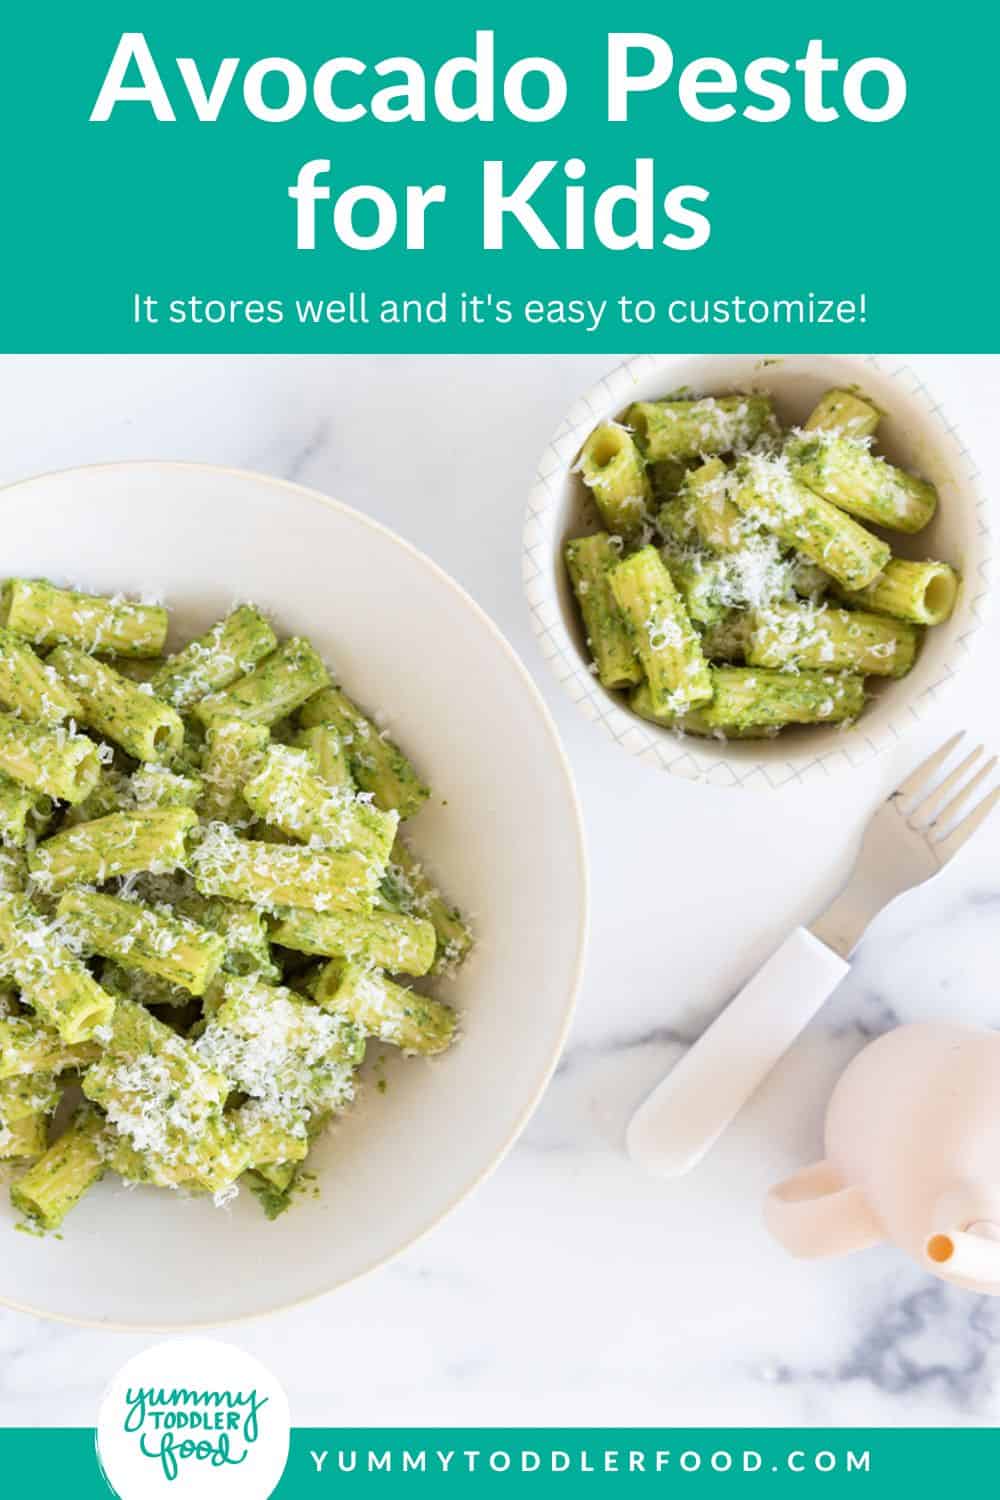 how to make avocado pesto in grid of 4 images.